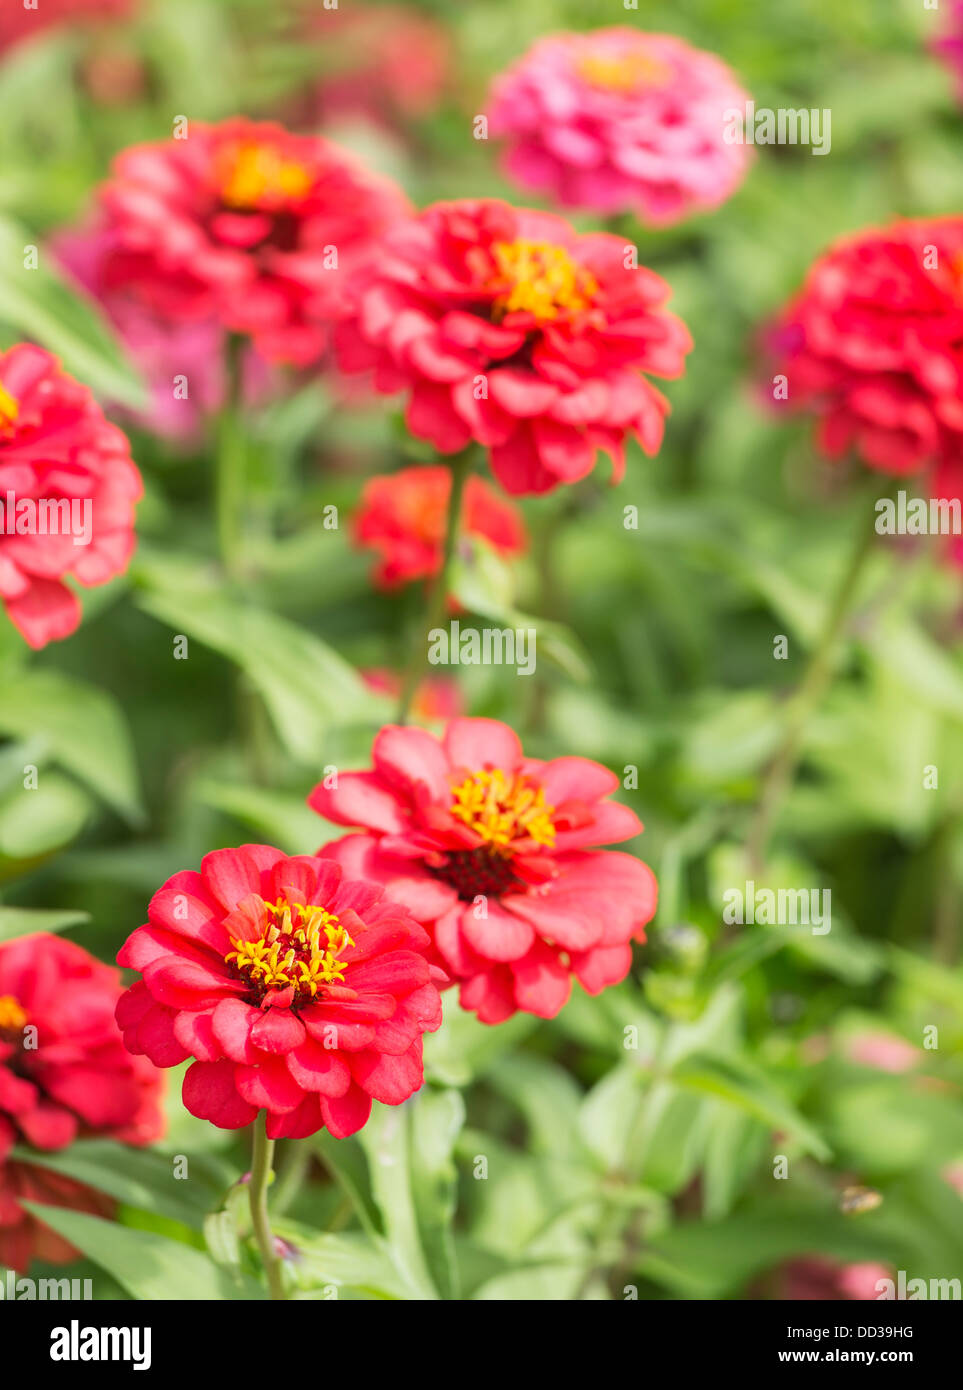 Colourful, bright red zinnia flowers with yellow stamens Stock Photo